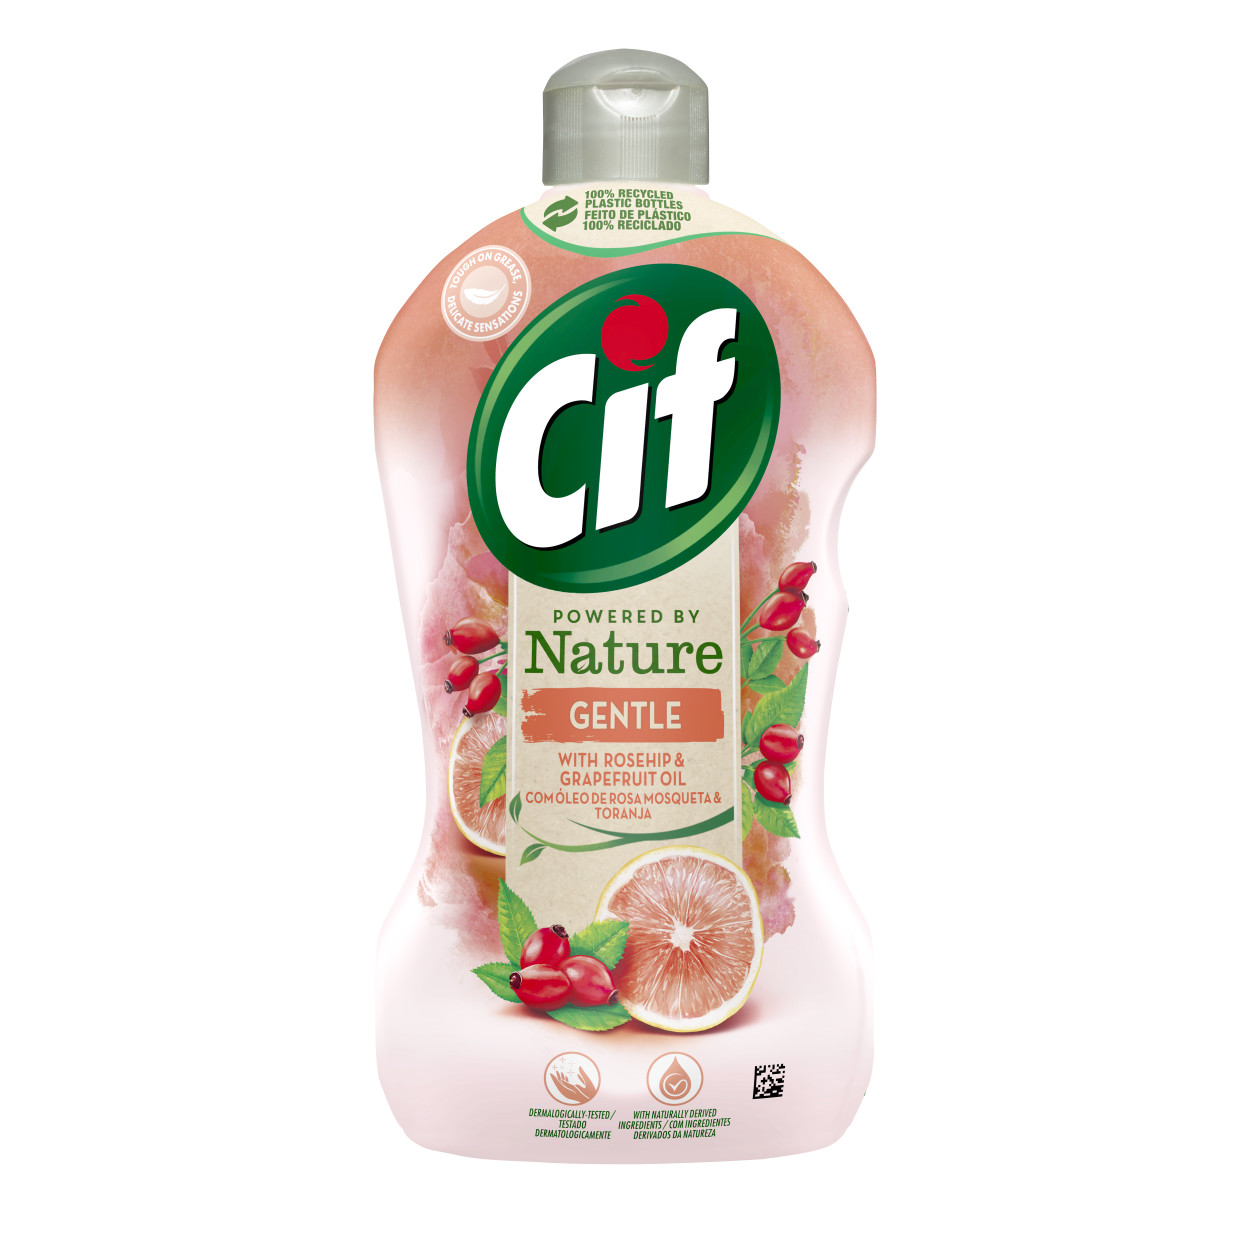 Cif Powered by Nature Gentle Mosogatószer with Rosehip and Grapefruit Oil csomag lövés